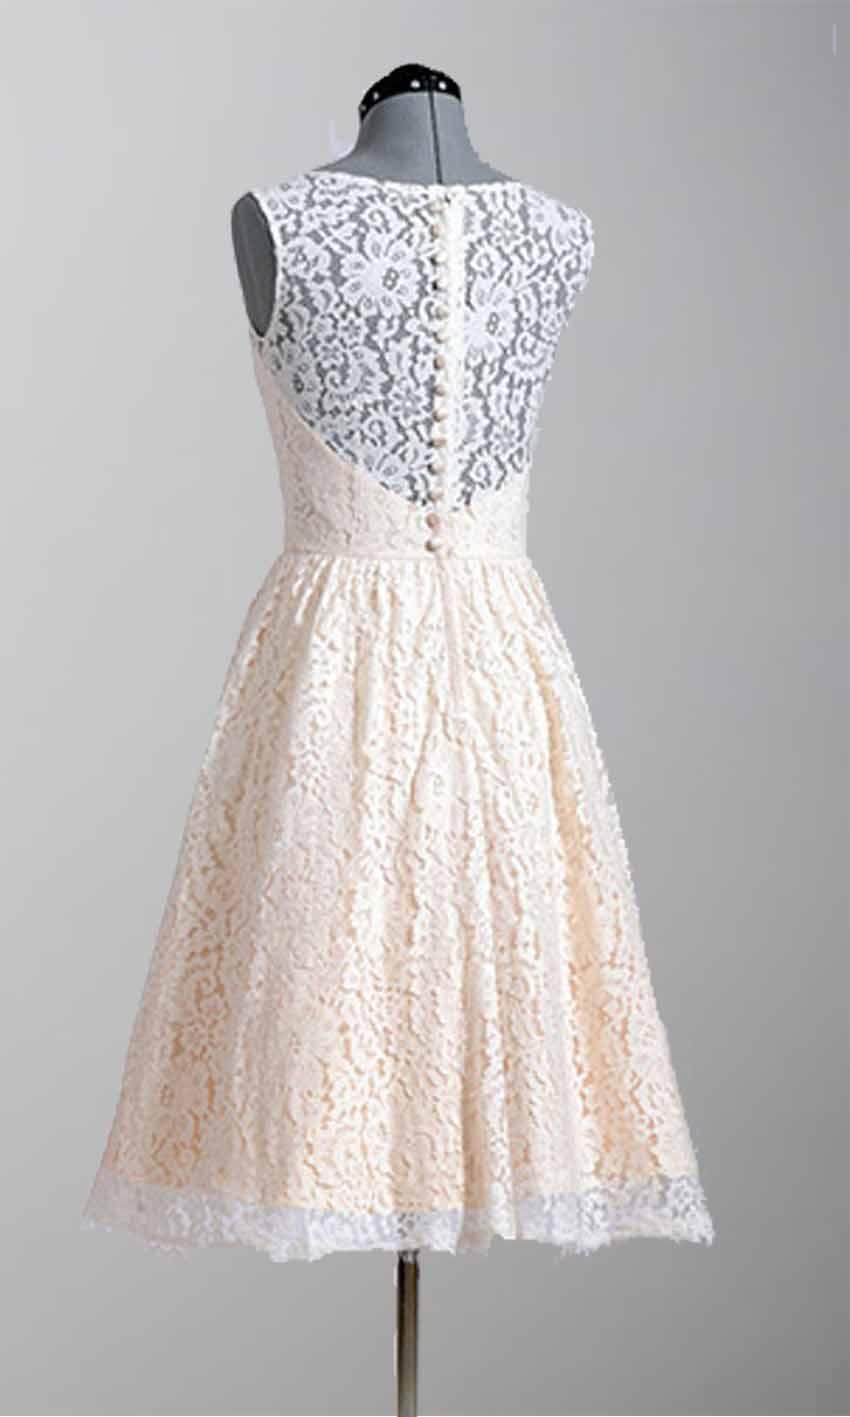 Mariage - Knee Length Modern Lace Vintage Wedding Party Dresses KSP296 [KSP296] - £89.00 : Cheap Prom Dresses Uk, Bridesmaid Dresses, 2014 Prom & Evening Dresses, Look for cheap elegant prom dresses 2014, cocktail gowns, or dresses for special occasions? kissprom.c